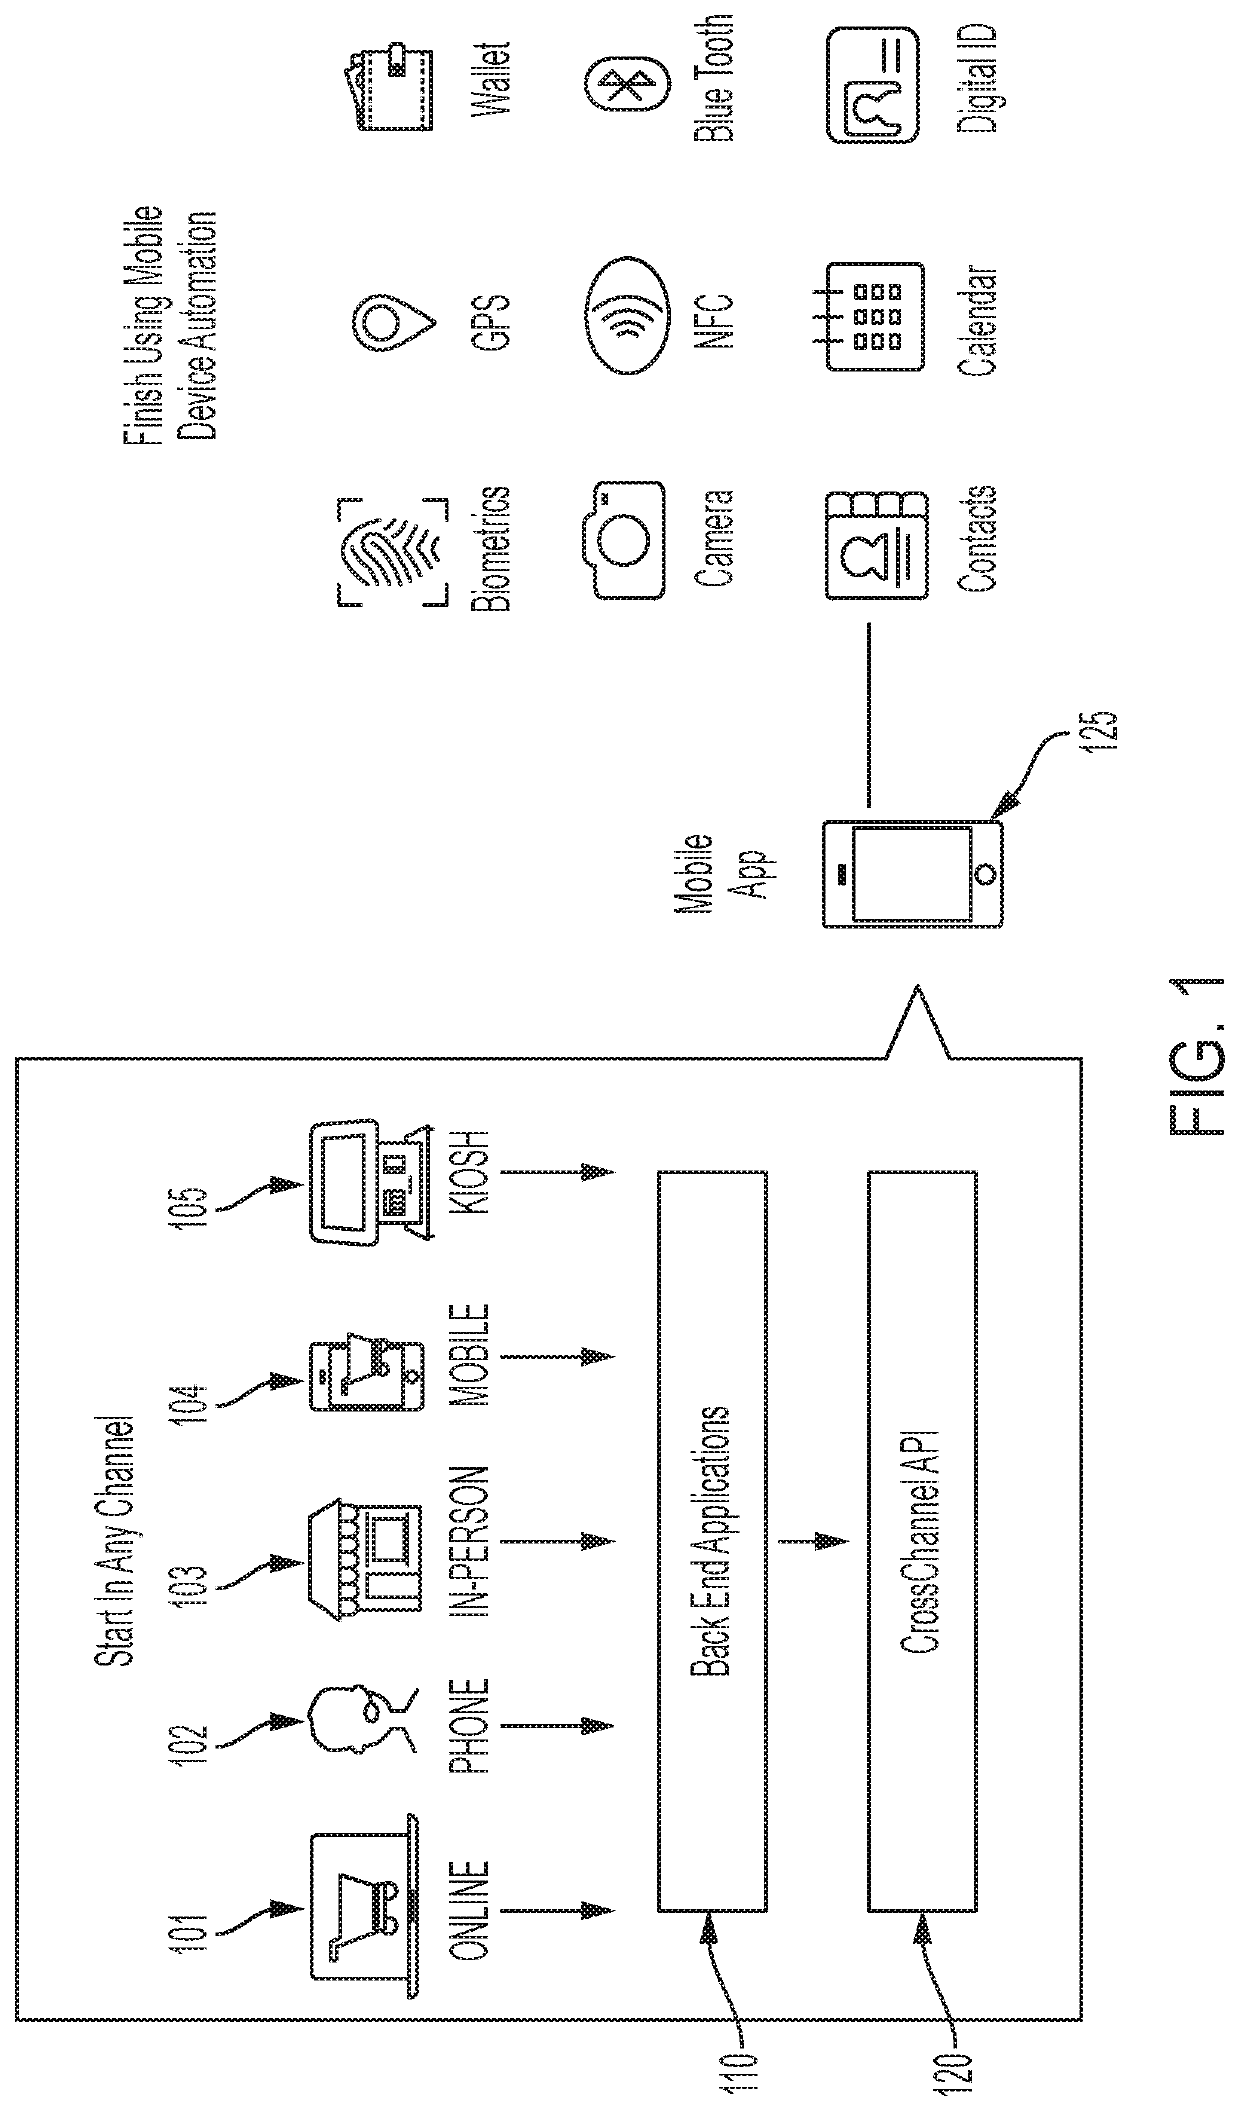 Method and system for completing cross-channel transactions